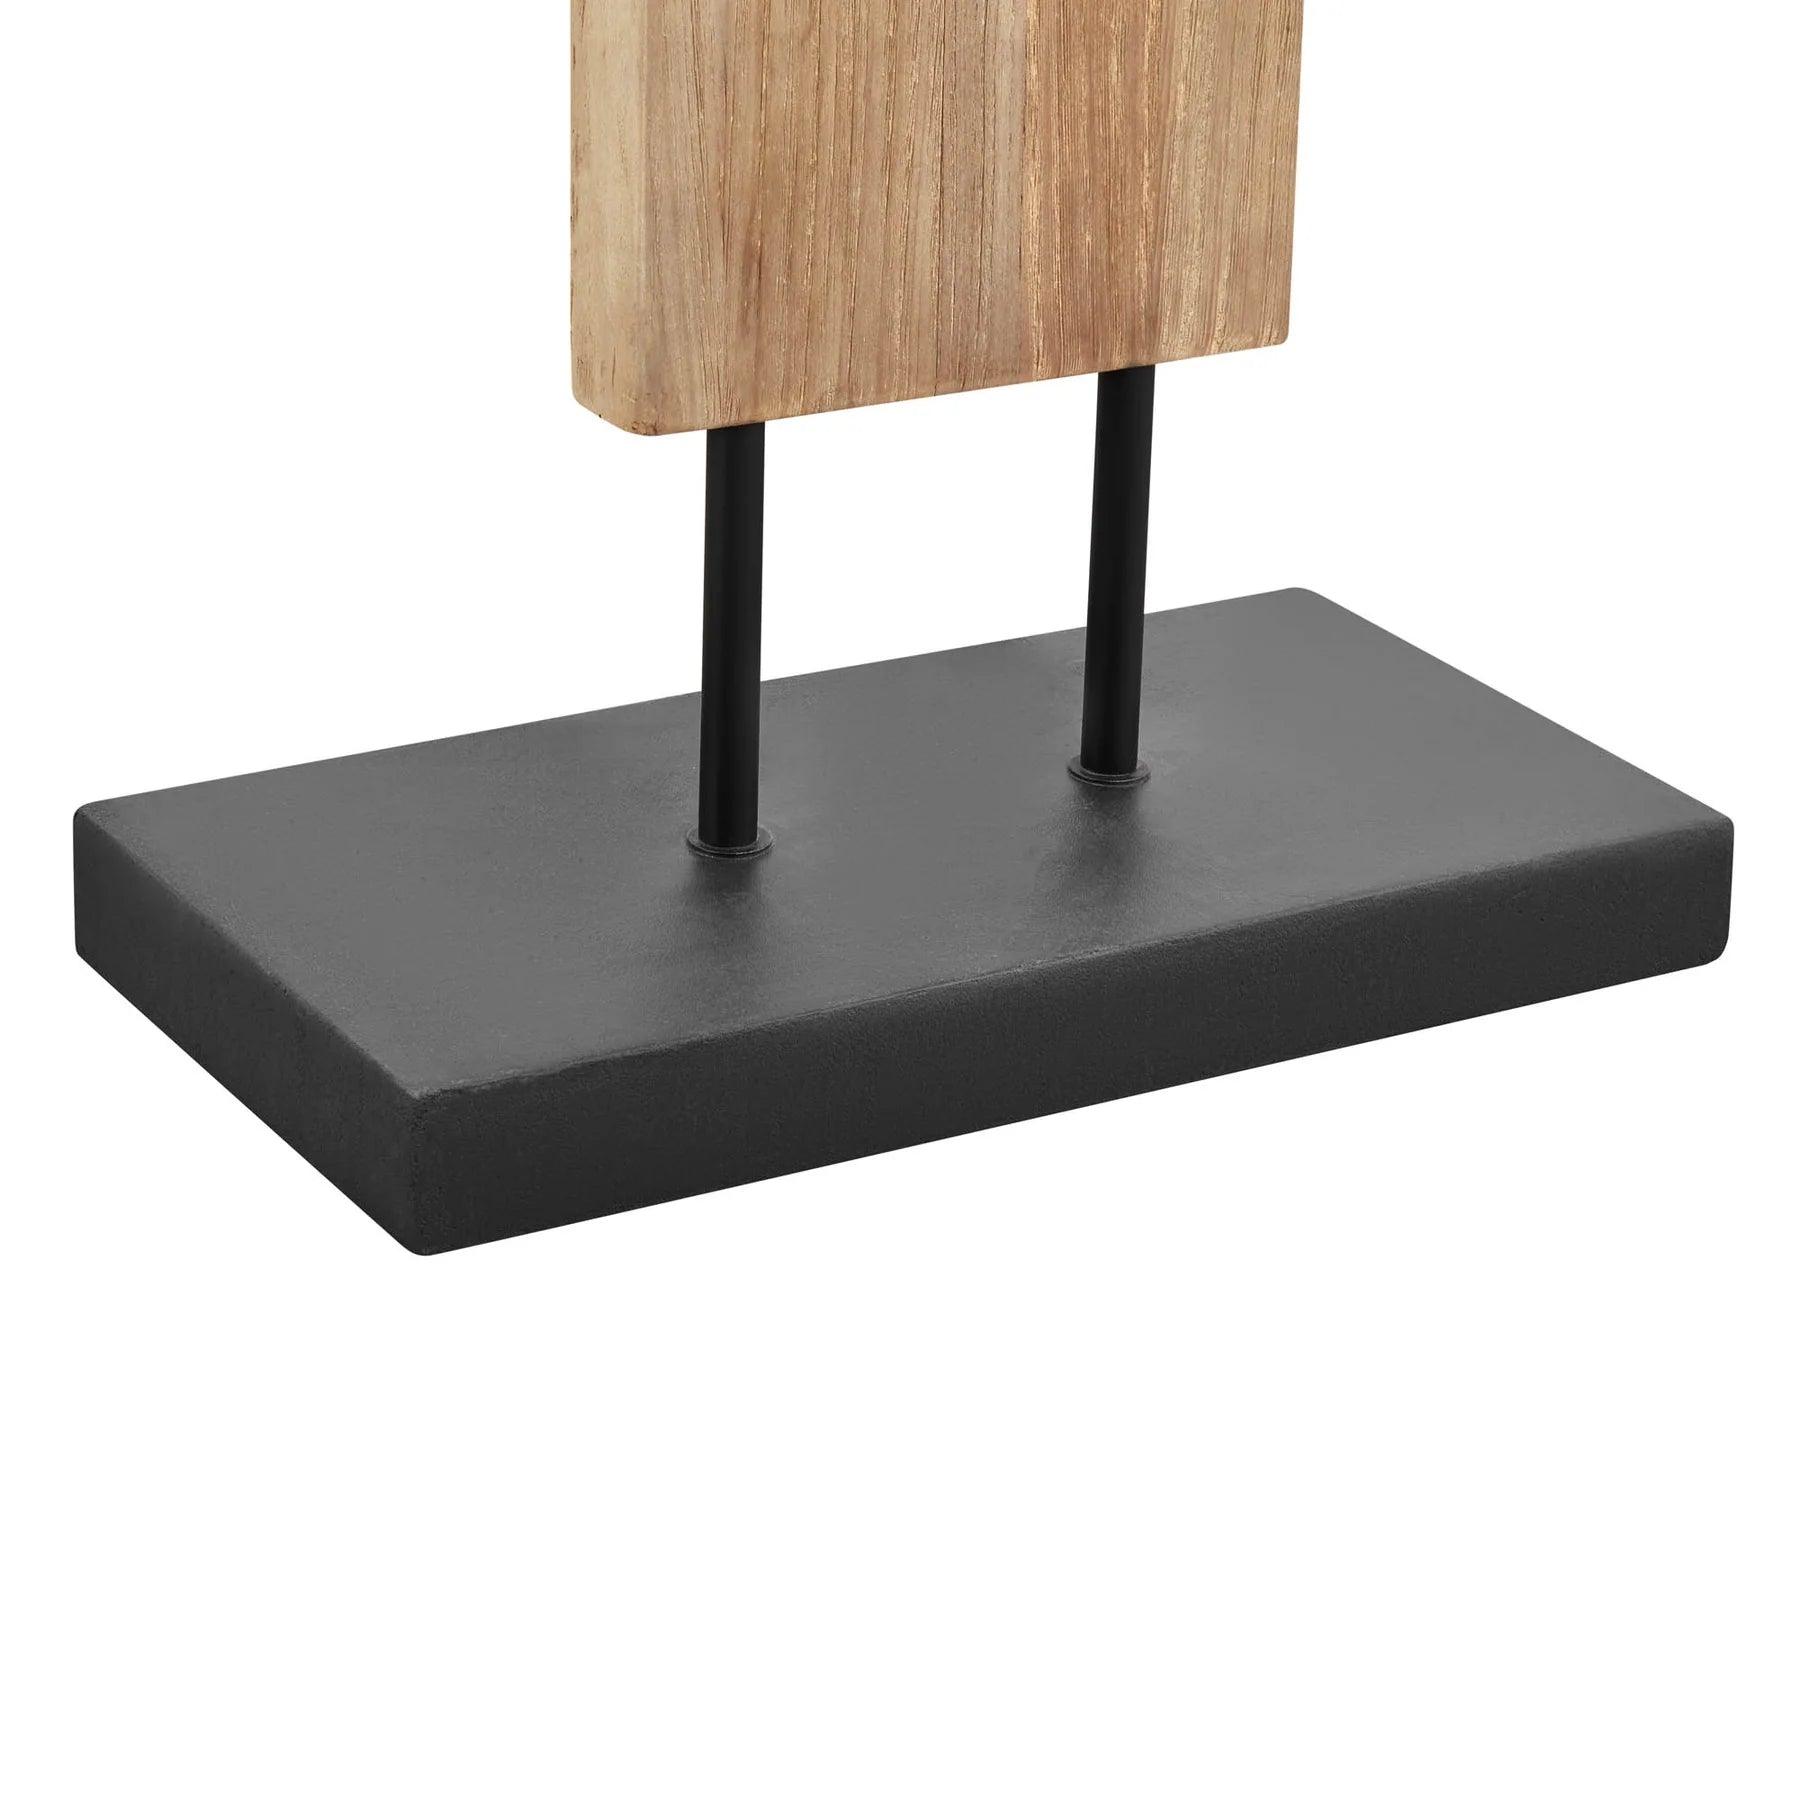 FONTE Standing Wooden Lamp - Northern Interiors